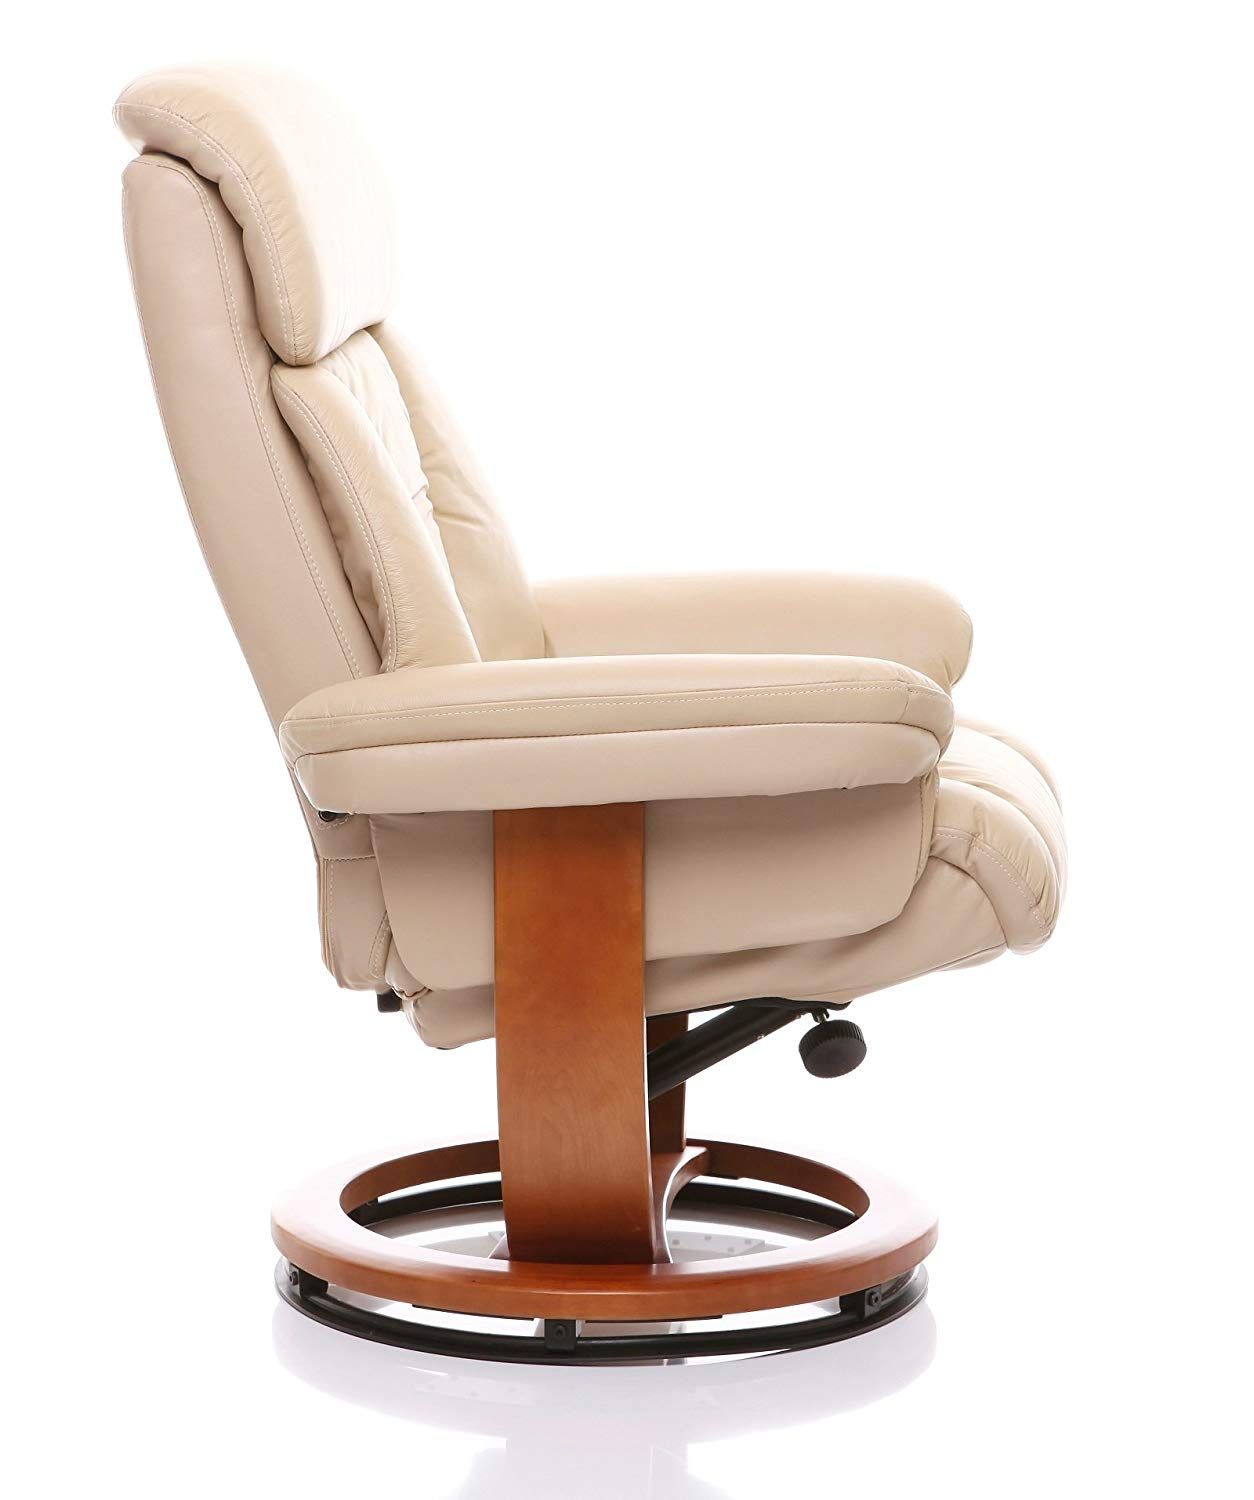 Gfa The Saigon Genuine Leather Recliner Swivel Chair Matching Throughout Amala Bone Leather Reclining Swivel Chairs (View 20 of 25)